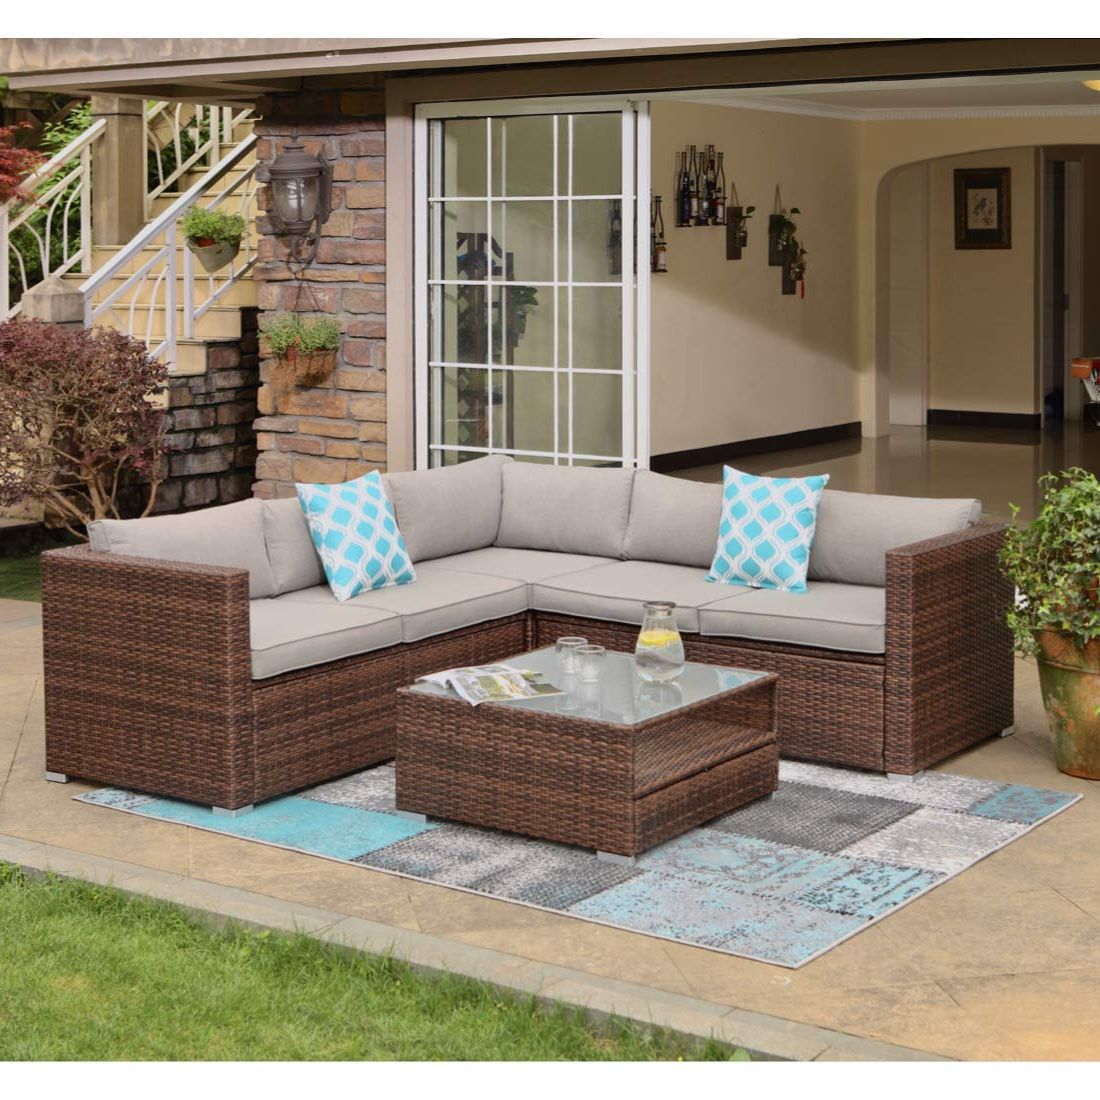 Favorite Amazon: Cosiest 4 Piece Outdoor Furniture Set All Weather Brown Wicker  Sectional Sofa W Warm Gray Thick Cushions, Glass Coffee Table, 2 Teal  Pattern Pillows Incl (View 4 of 15)